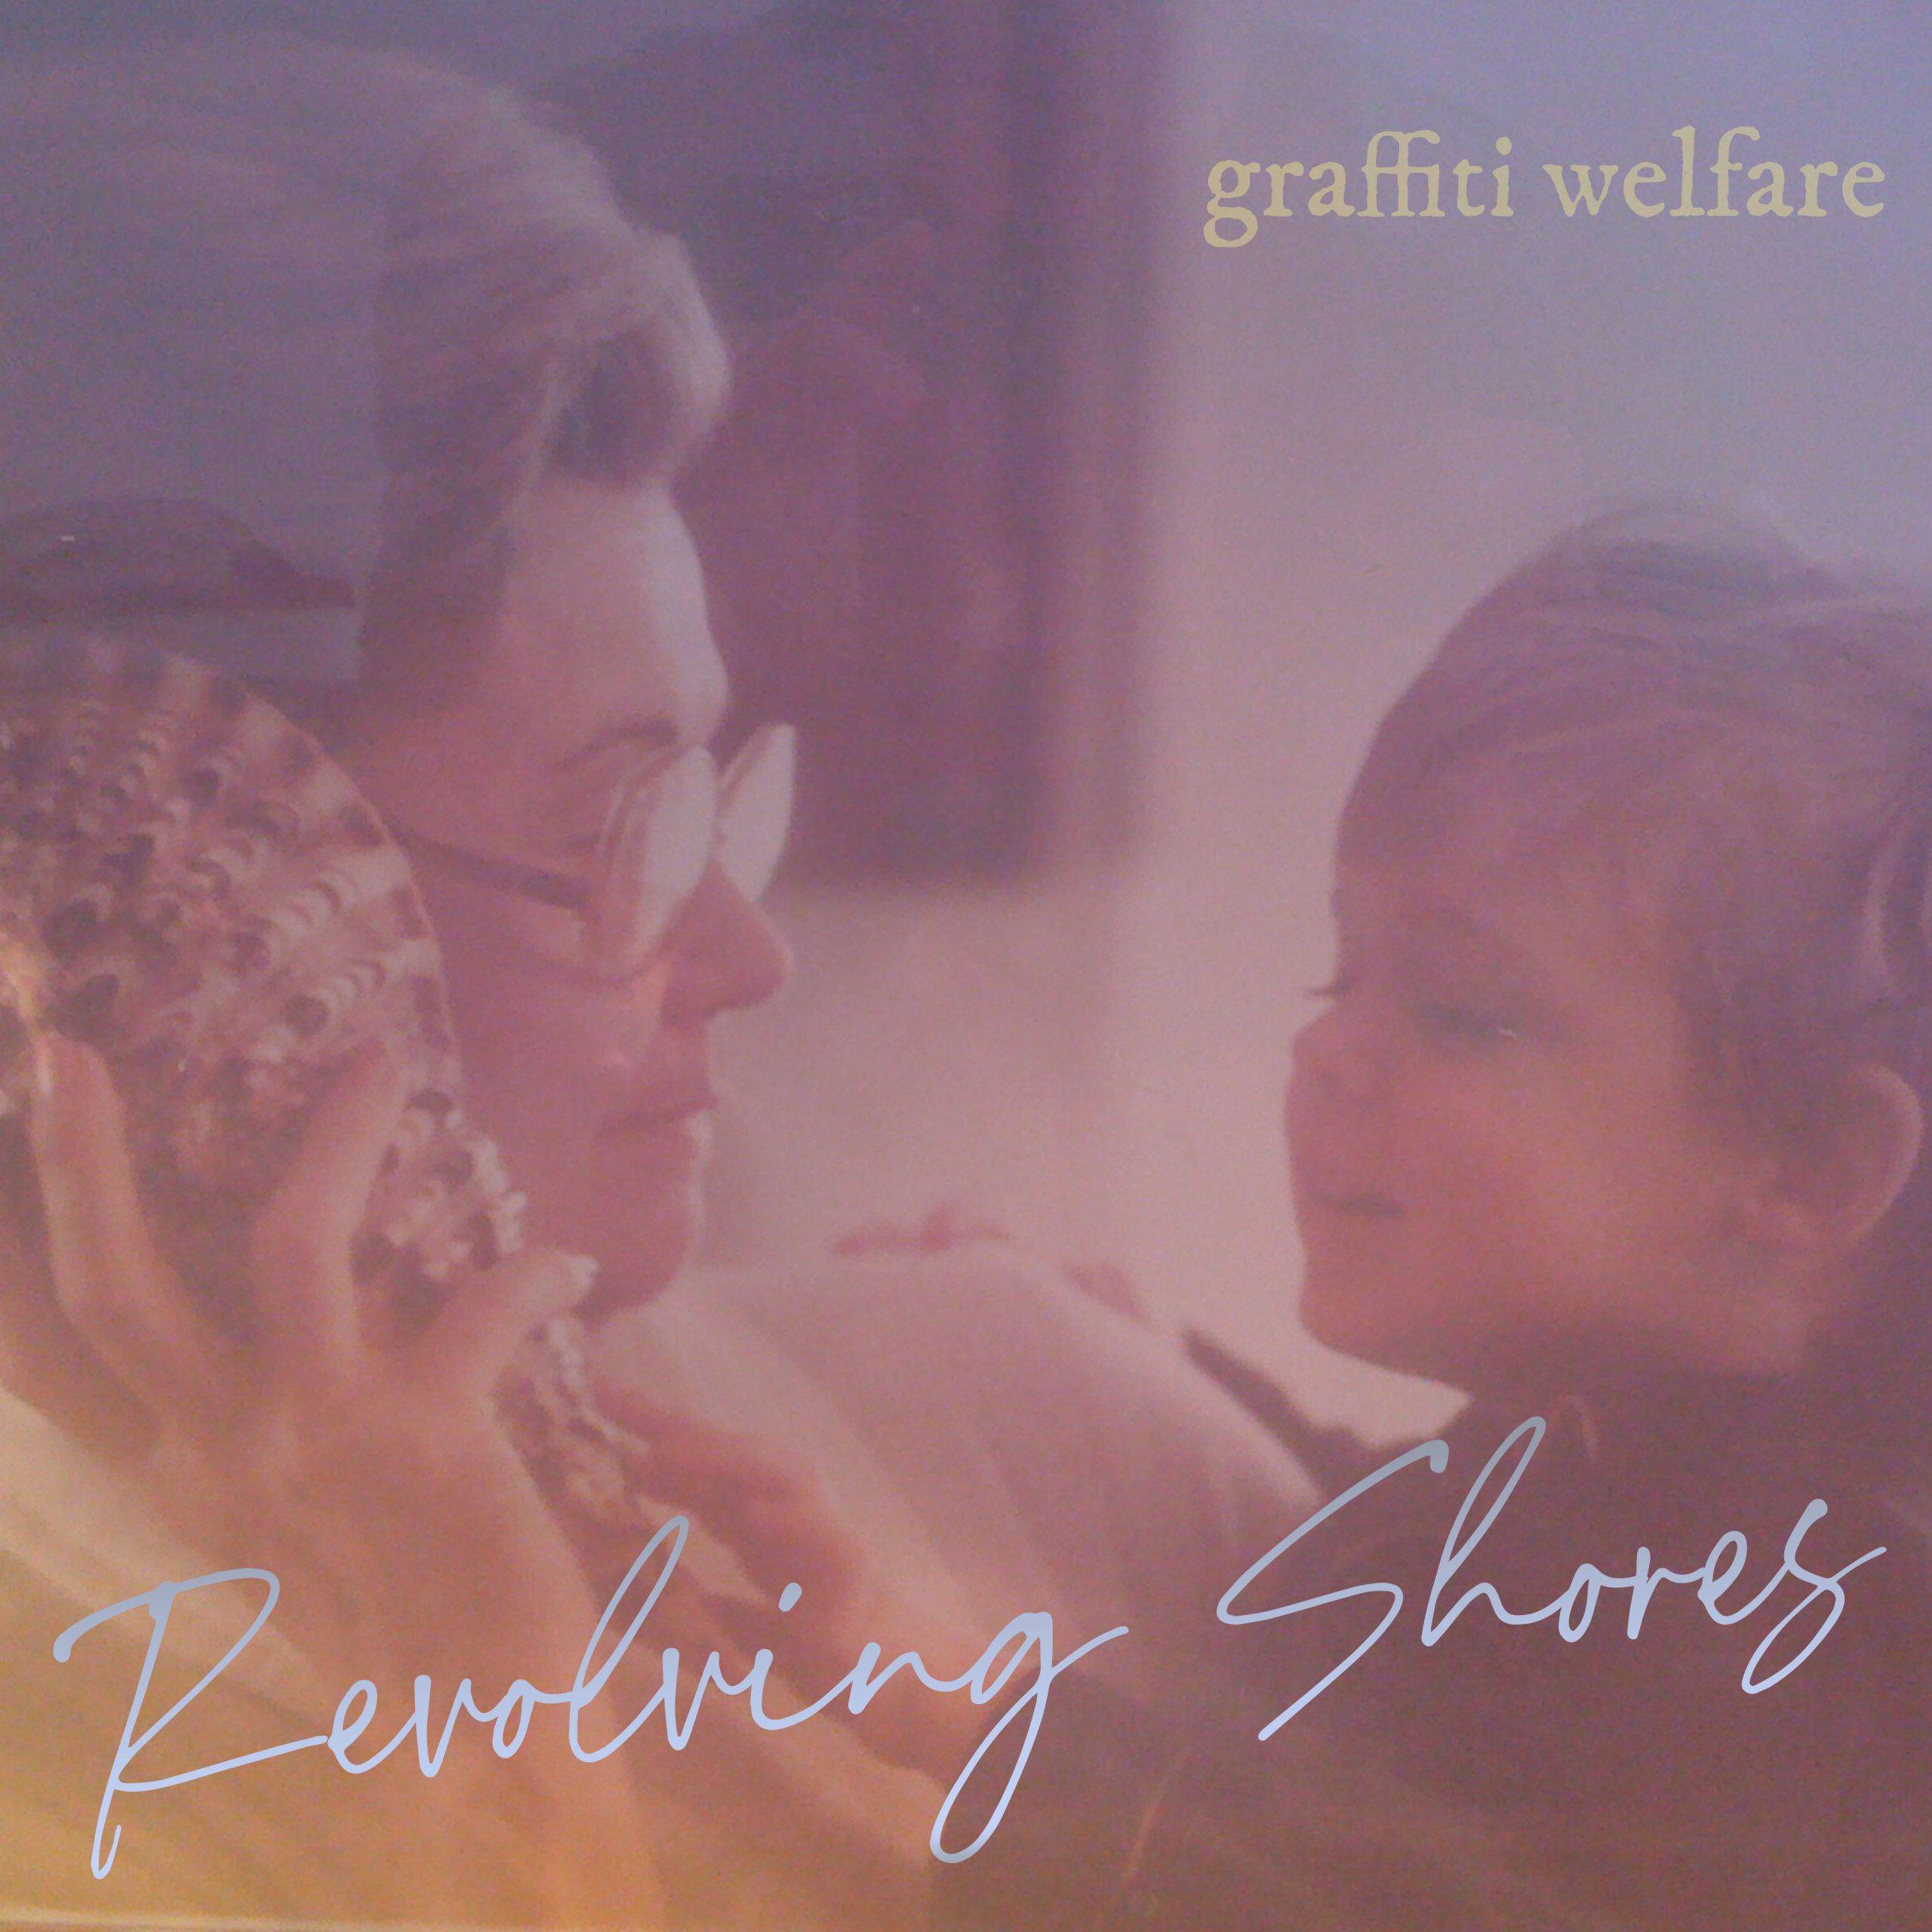 “There are states of consciousness in which you can listen to sound and realize that that is the whole point of being alive.” says ‘Graffiti Welfare’ as he drops majestic debut album ‘Revolving Shores’.